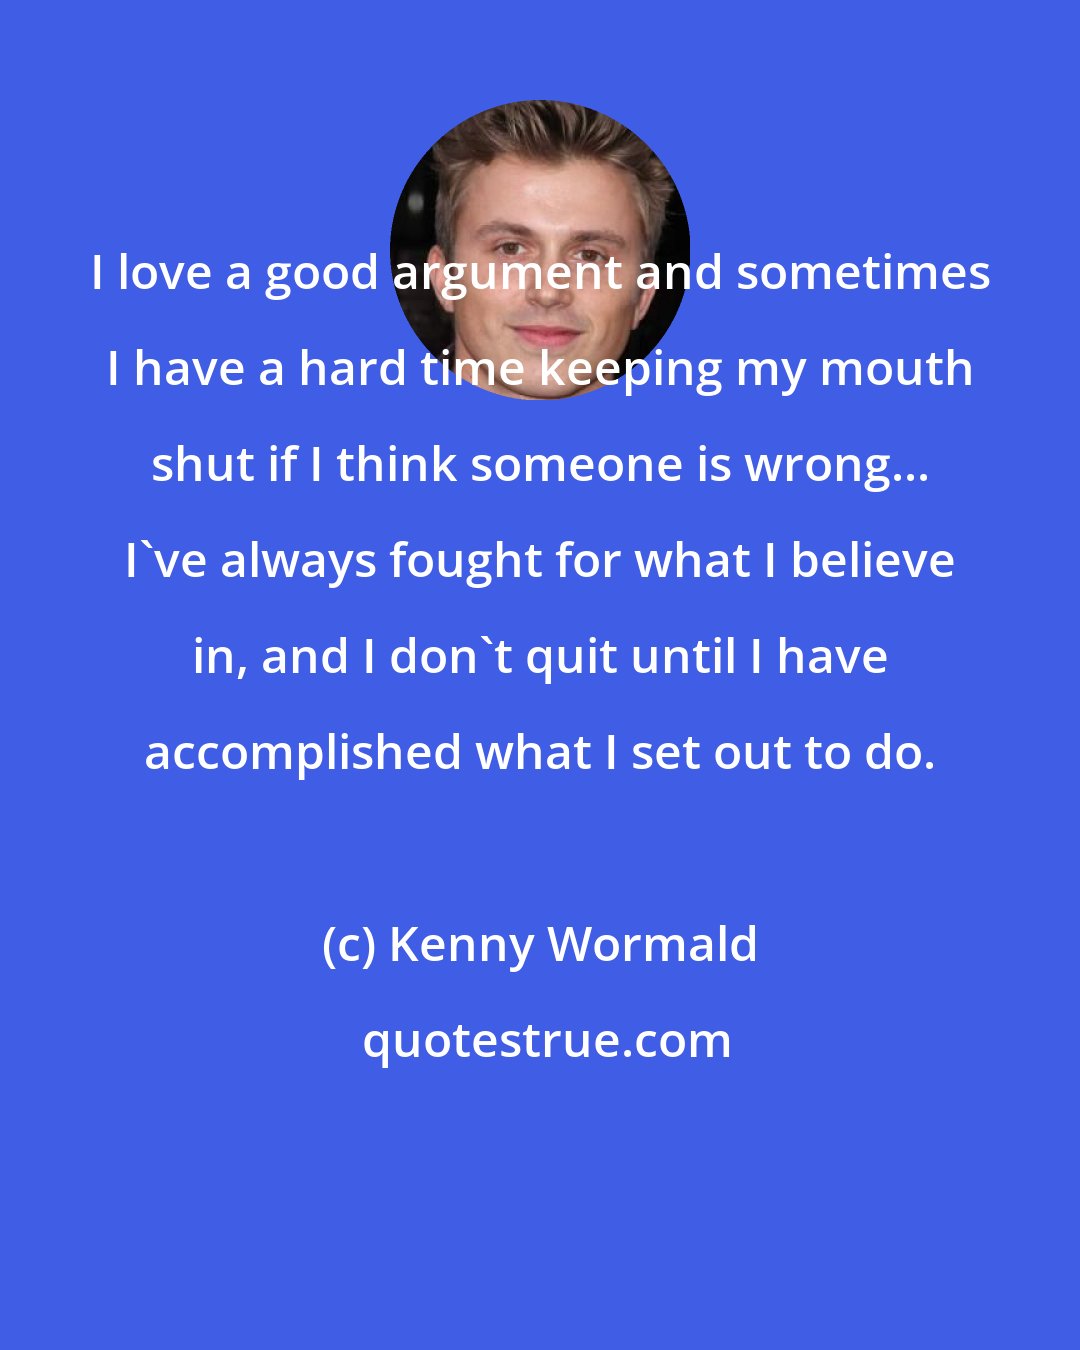 Kenny Wormald: I love a good argument and sometimes I have a hard time keeping my mouth shut if I think someone is wrong... I've always fought for what I believe in, and I don't quit until I have accomplished what I set out to do.